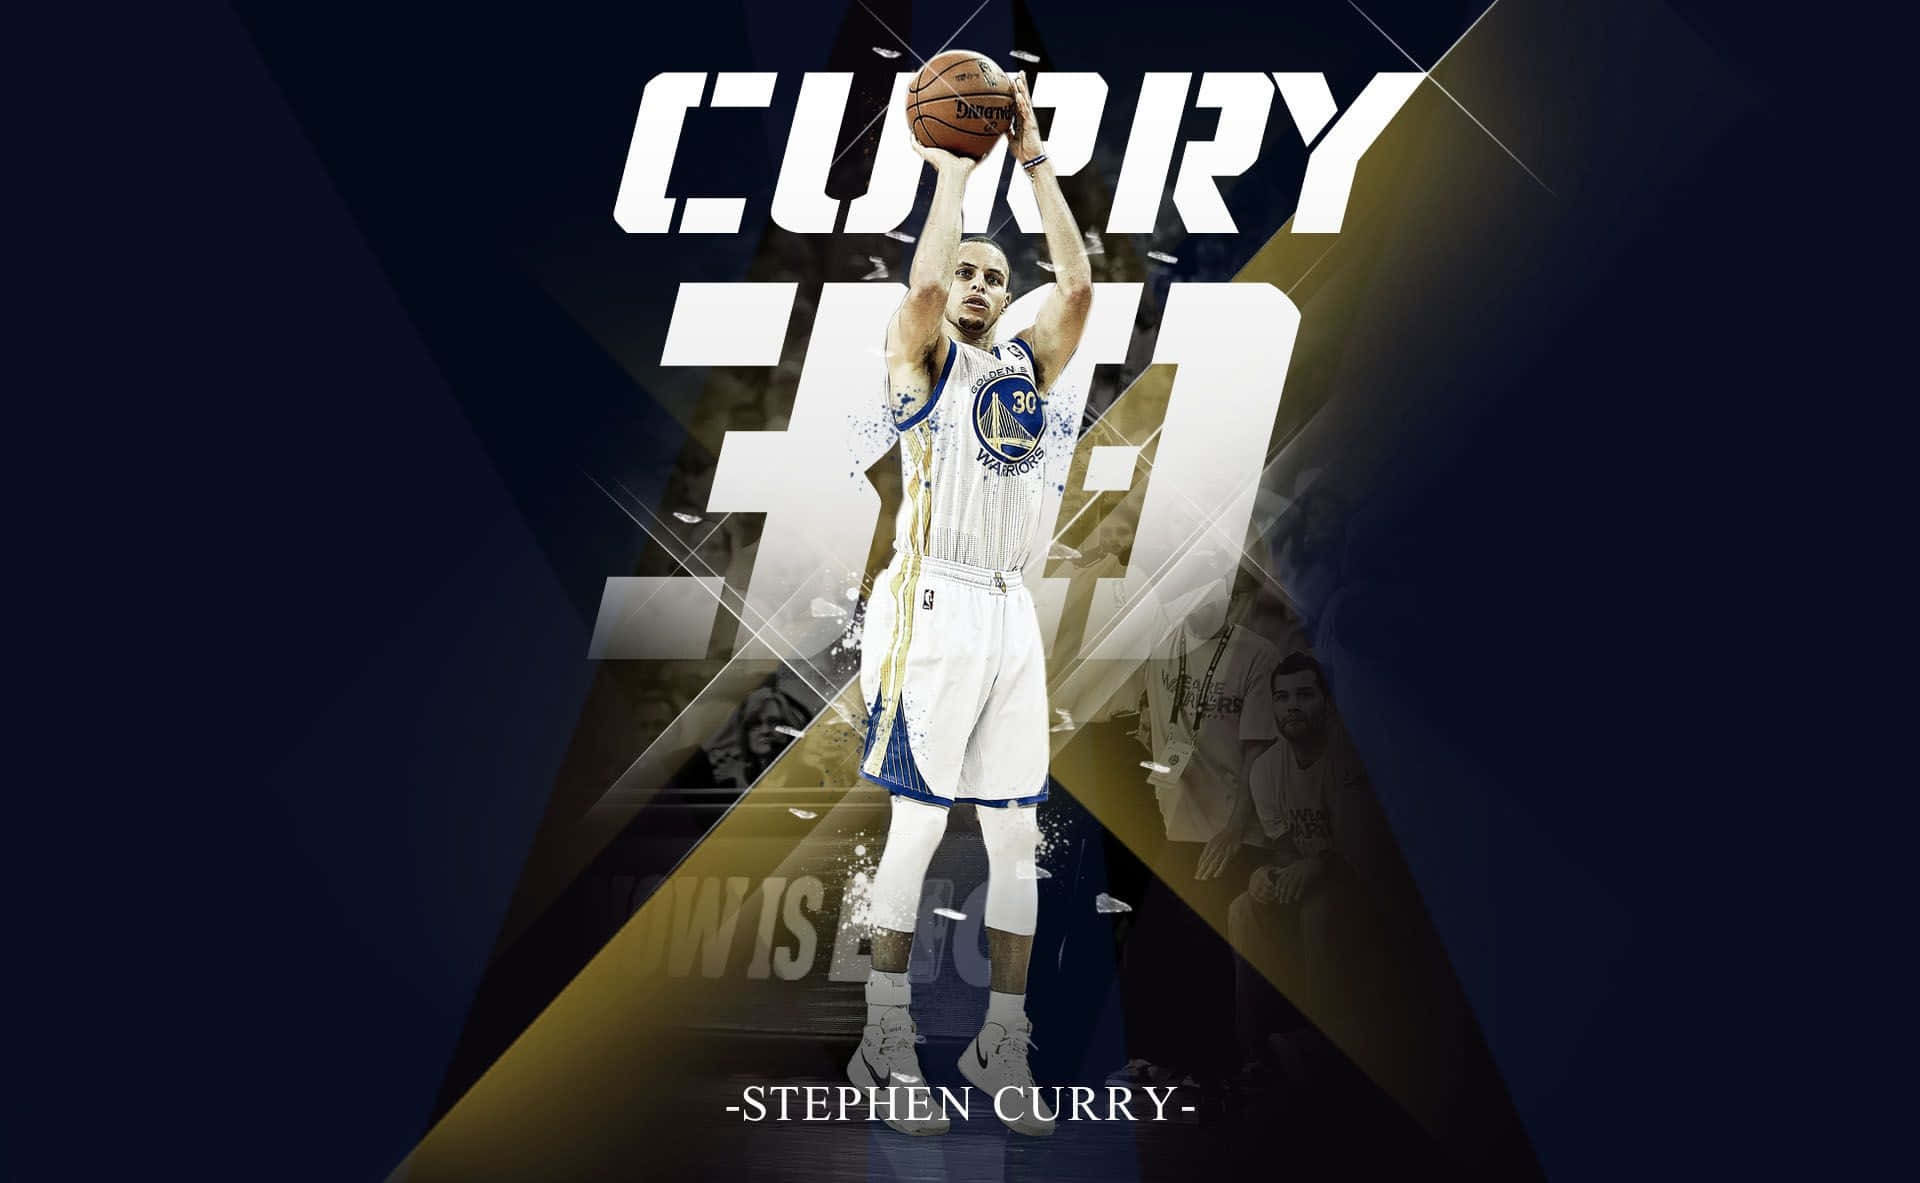 Stephen Curry Remains Cool Under Pressure